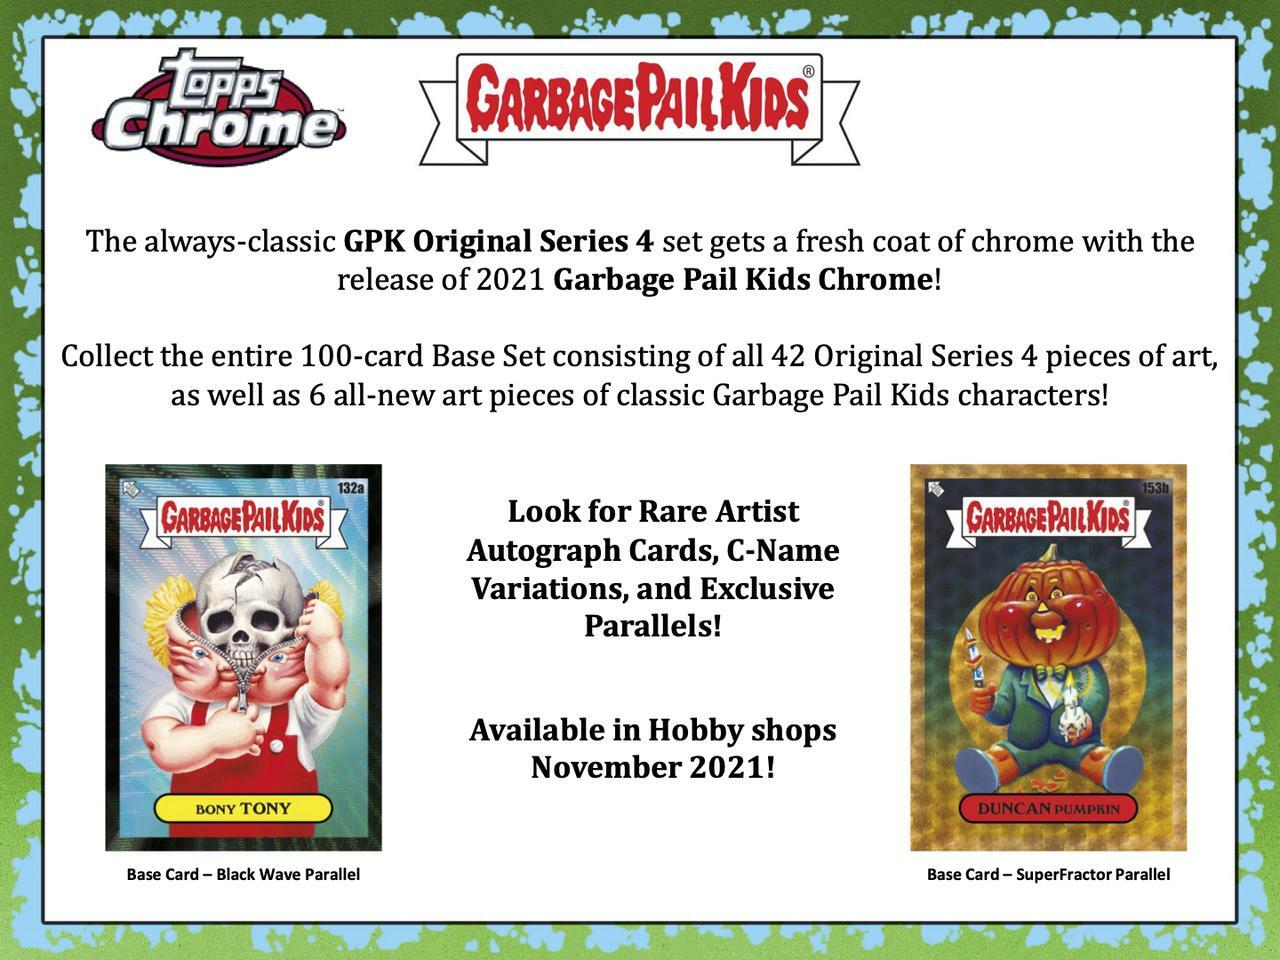 Garbage pail kids BEYOND THE STREETS ☆ 1 UNOPENED 8 CARD PACK 